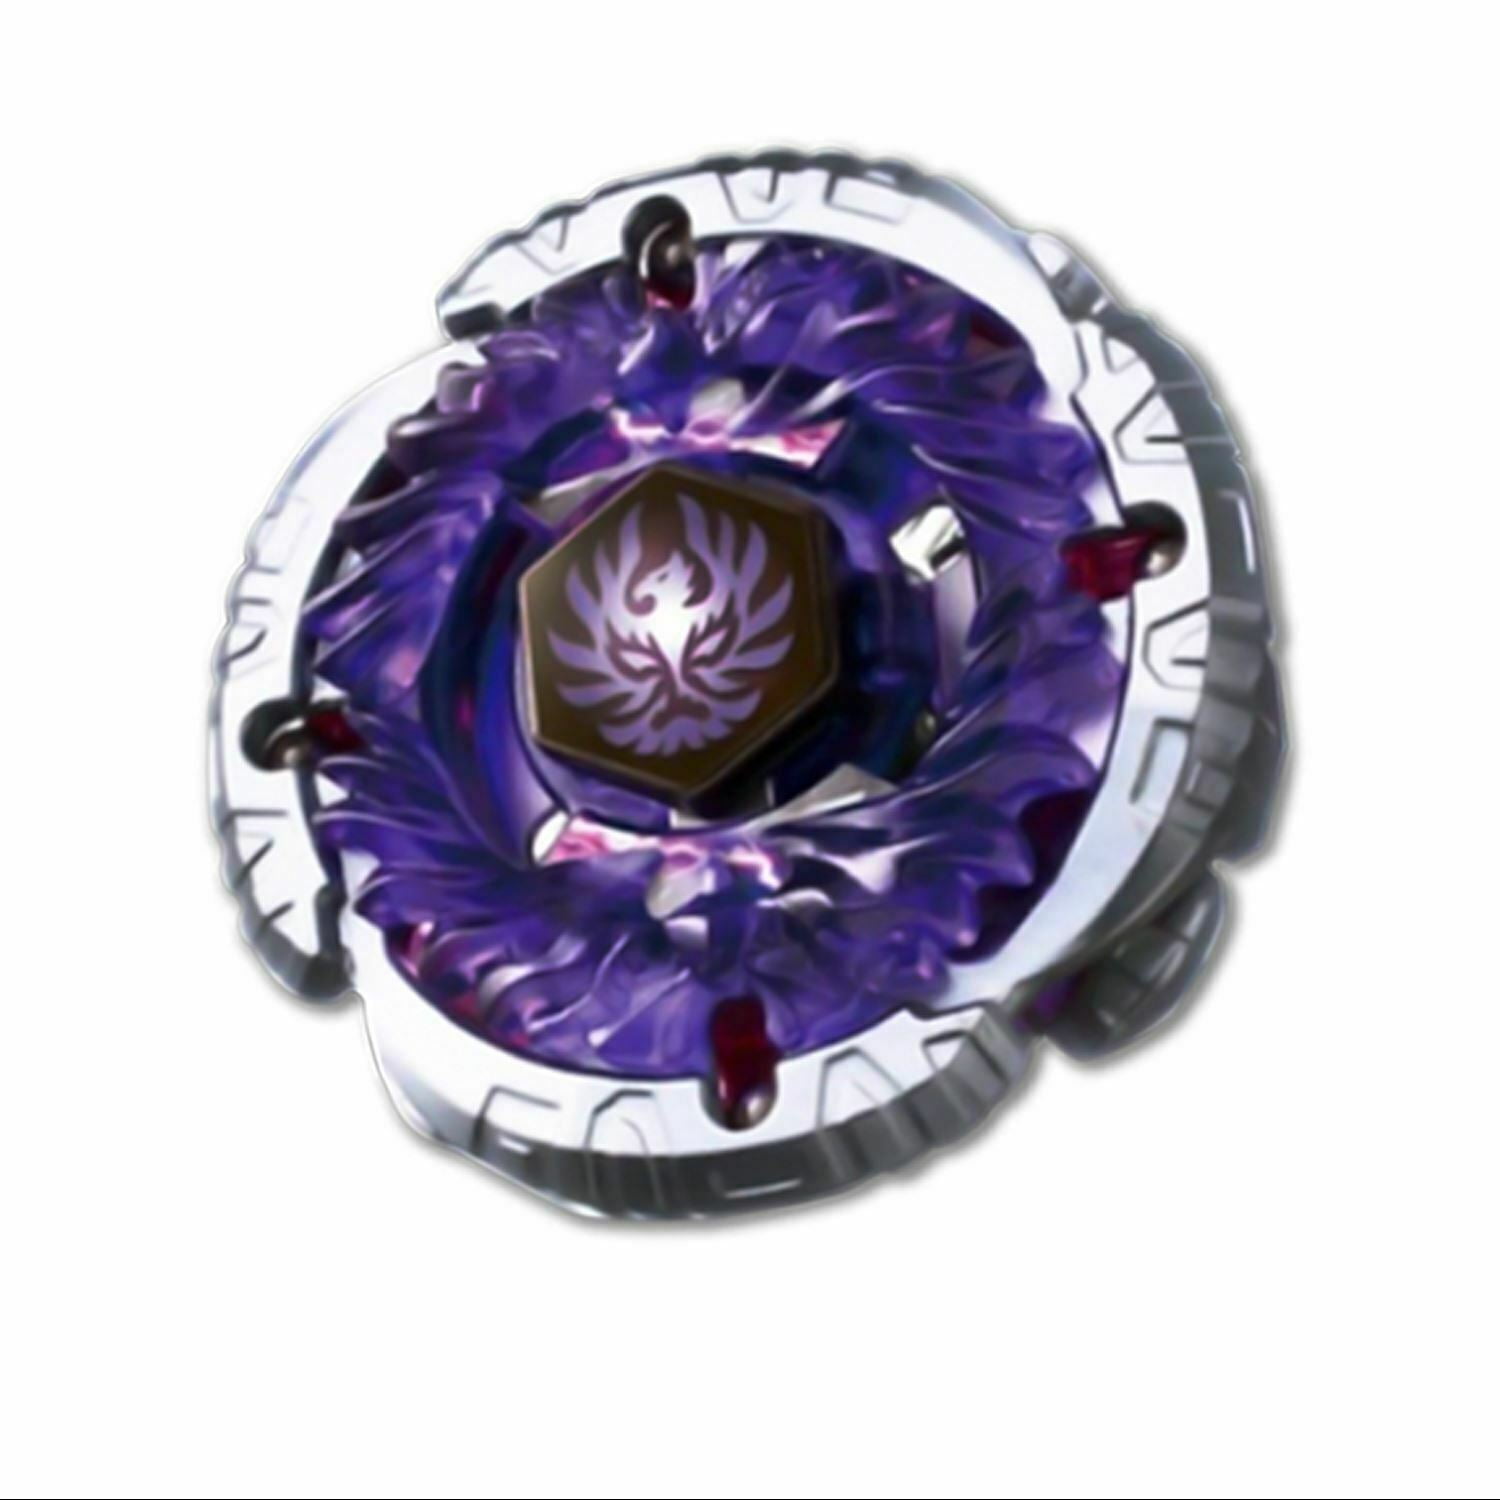 Spiral Screw Lyre BB-116 Beyblade w/ Free Launcher & Tips Parts /Card Pack